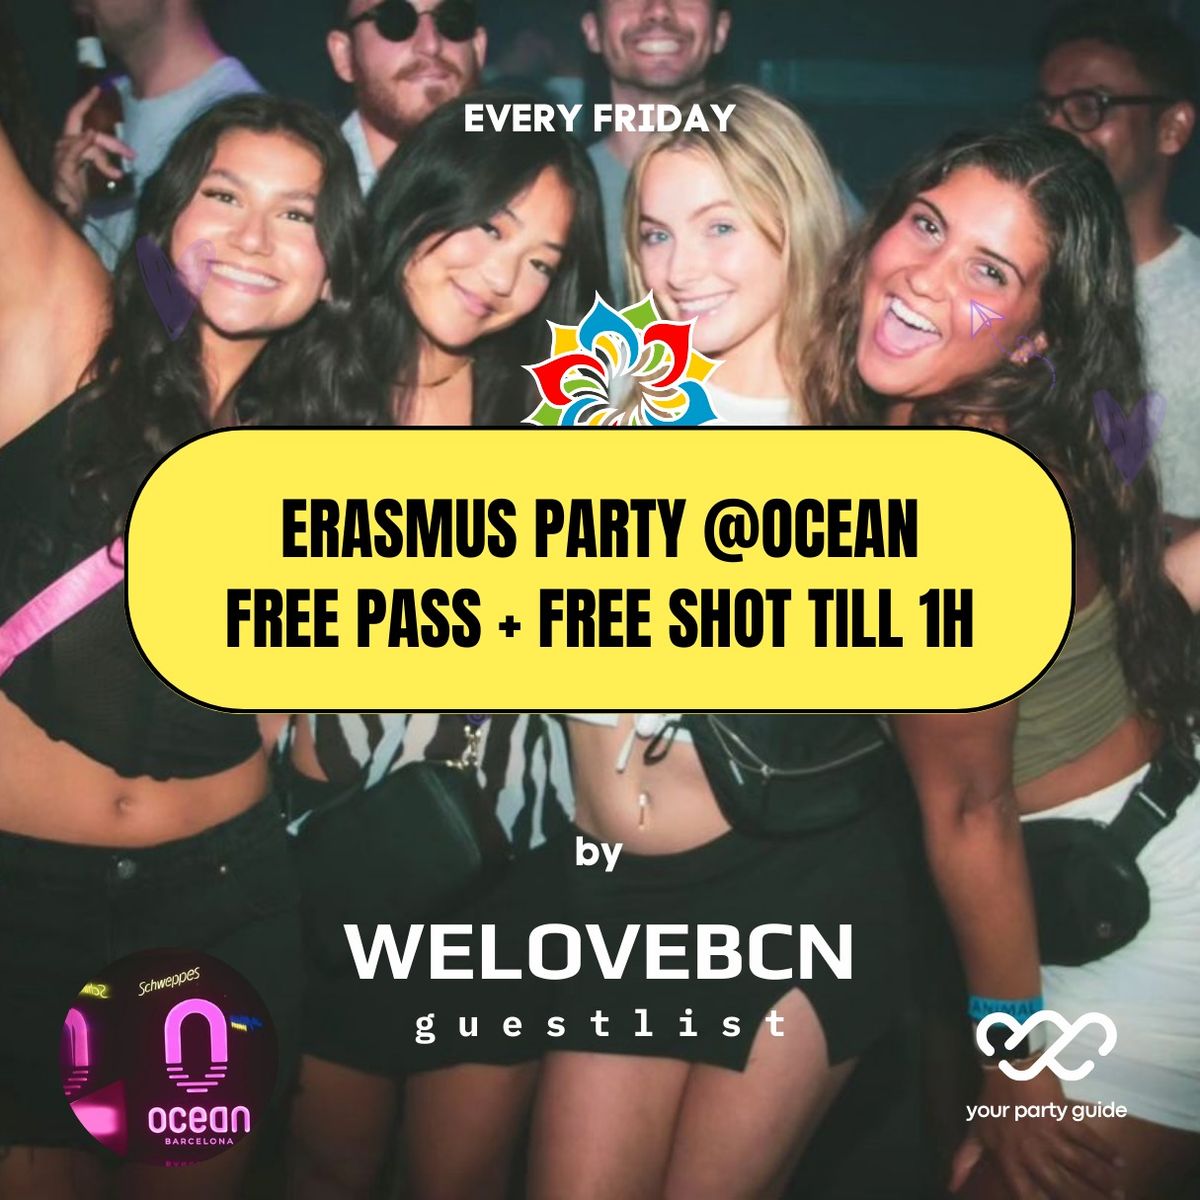 EVERY FRIDAY Free entry only with WELOVEBCN GUESTLIST